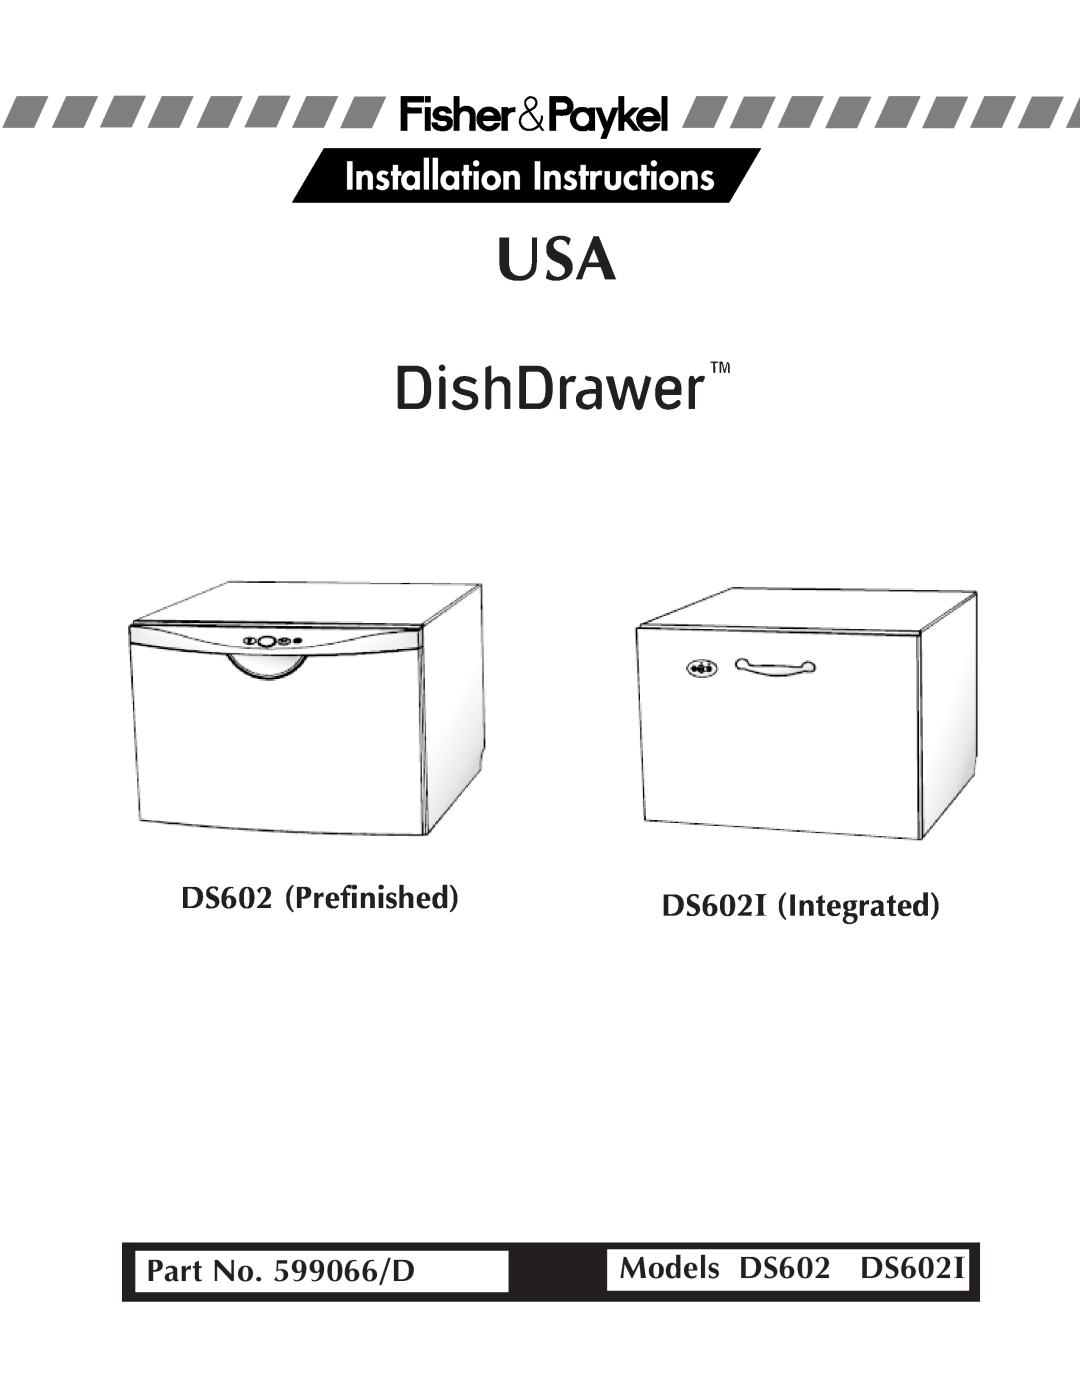 Fisher & Paykel manual DS602 Prefinished, Part No. 599066/D, Models DS602 DS602I, DS602I Integrated 